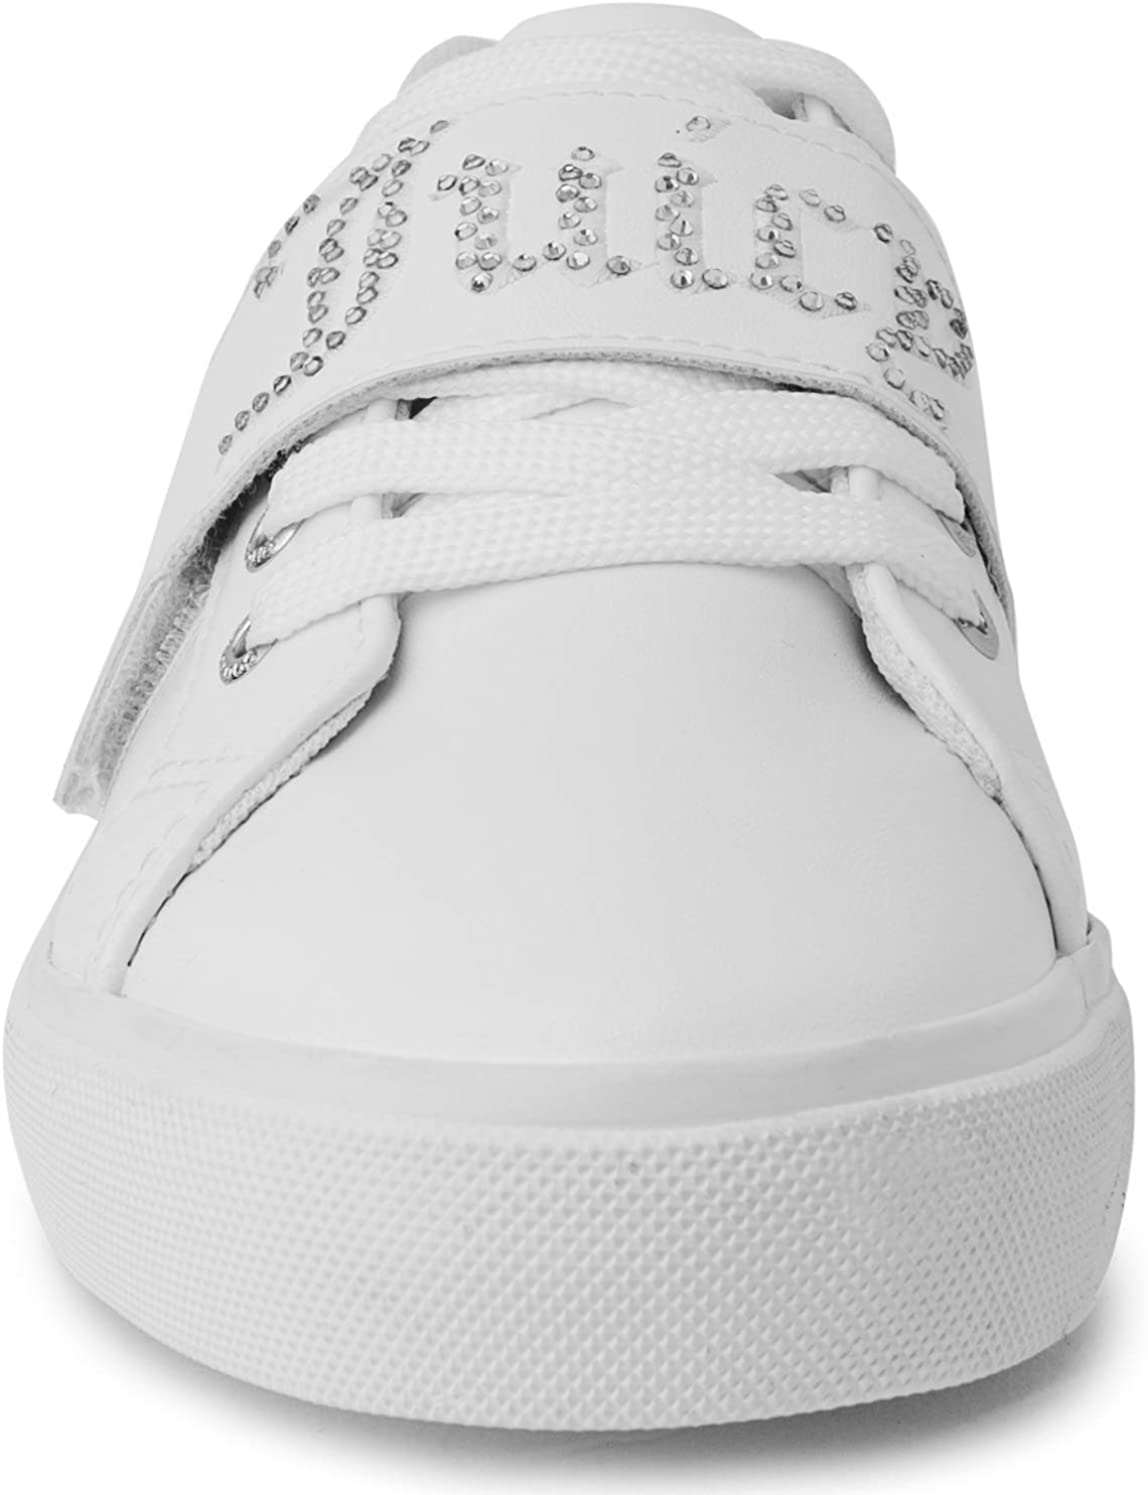 Juicy Couture Women Fashion Sneaker Womens Casual Shoes Platform Tennis Shoes All White, Chunky Sneakers, Walking Shoes - image 4 of 7